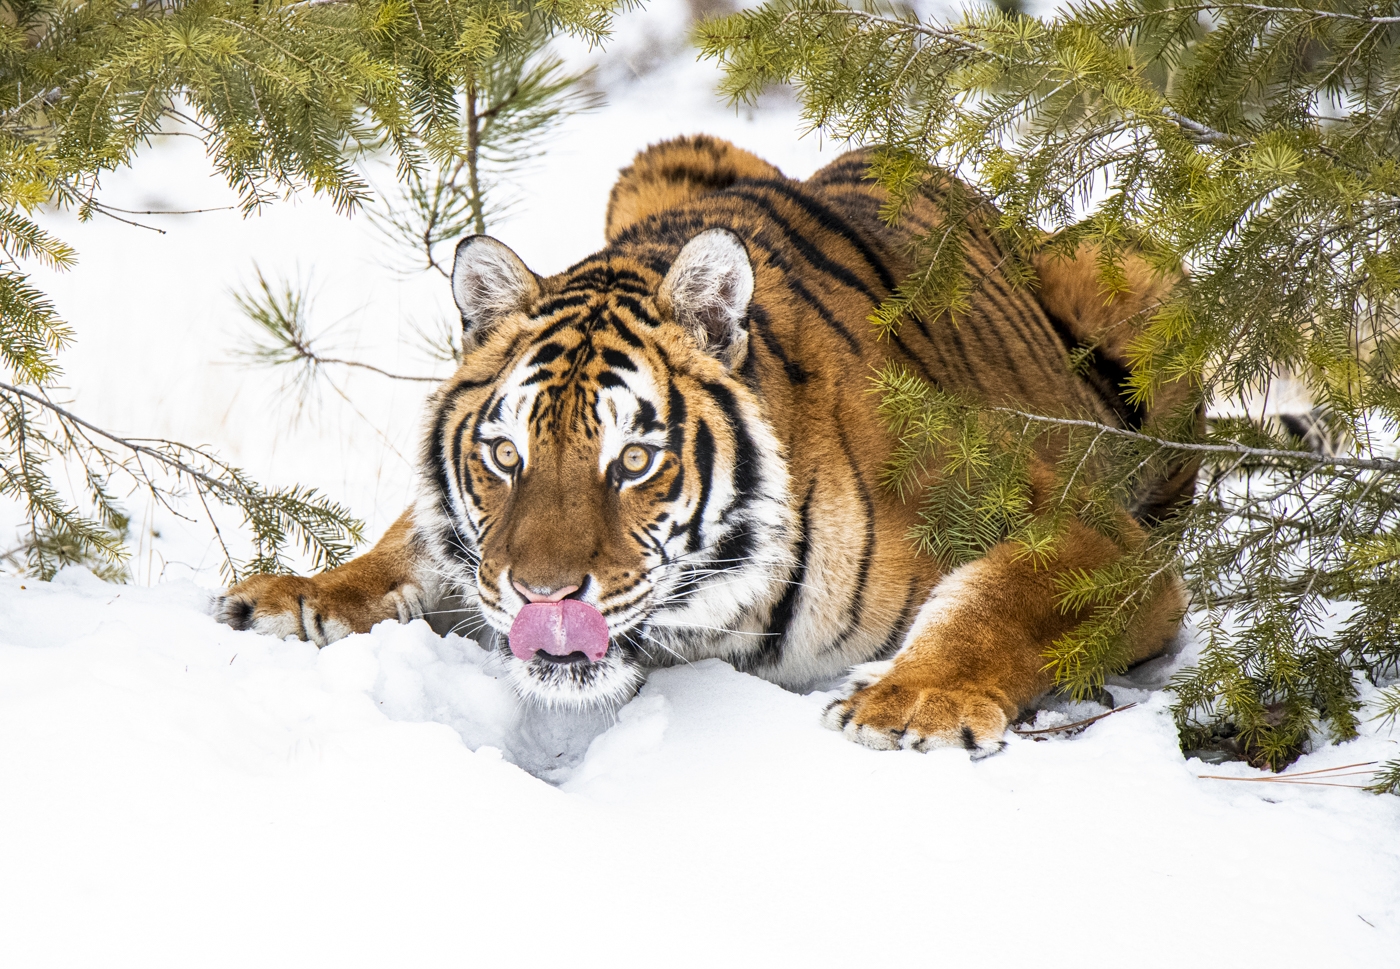 Tiger ready to pounce by Danielle D'Ermo